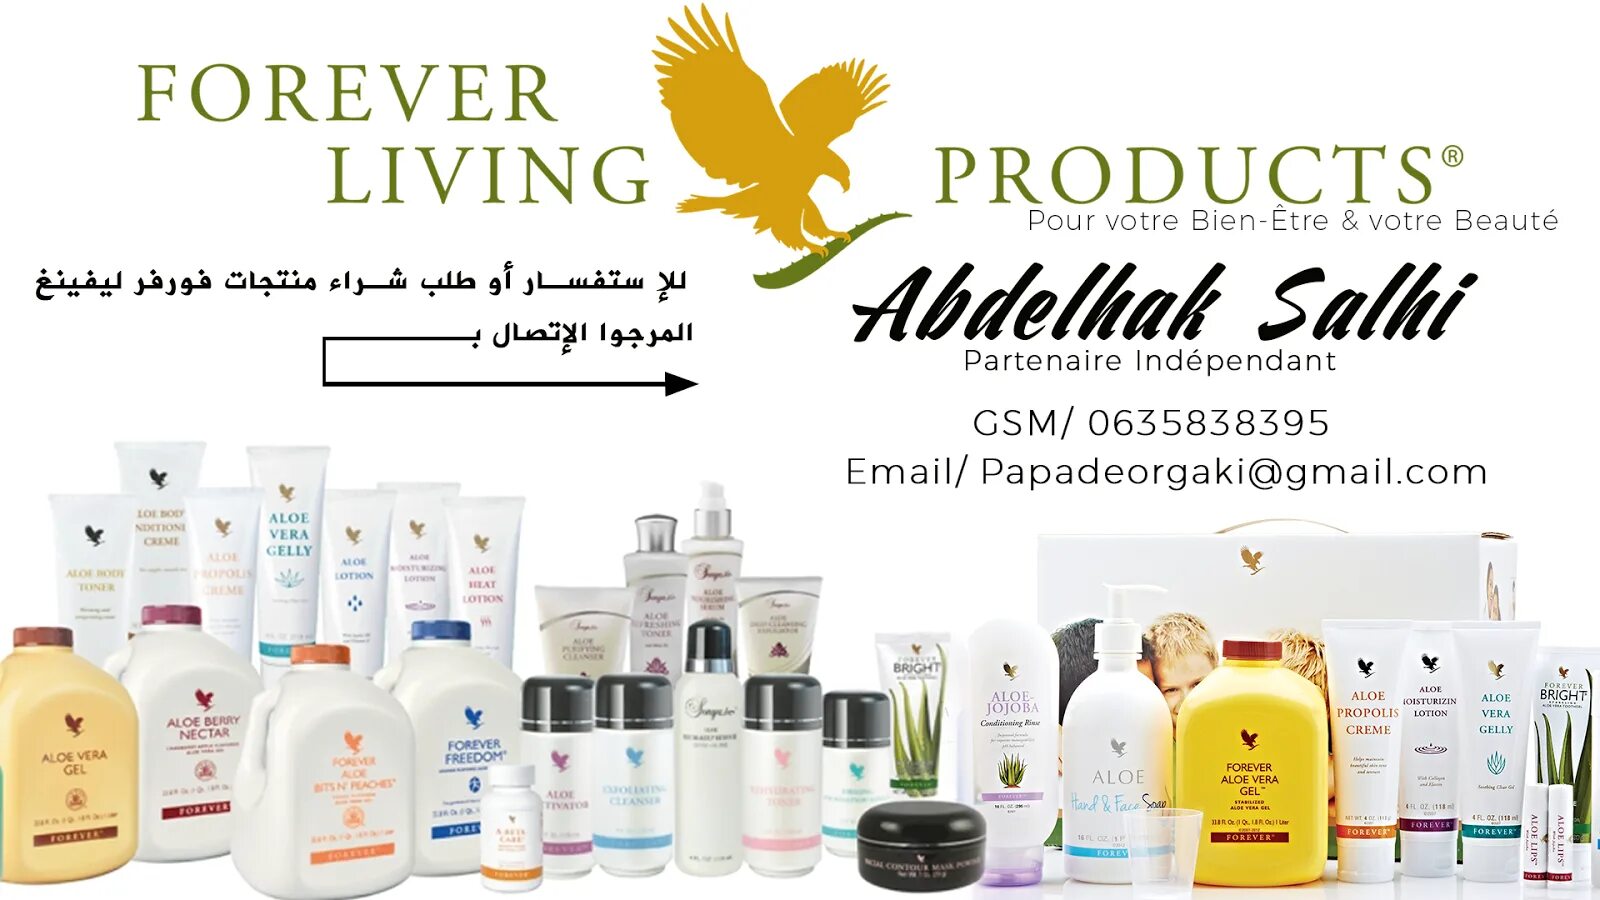 Forever Living products. Картинки Forever Living products. Форевер компании косметика. Living products